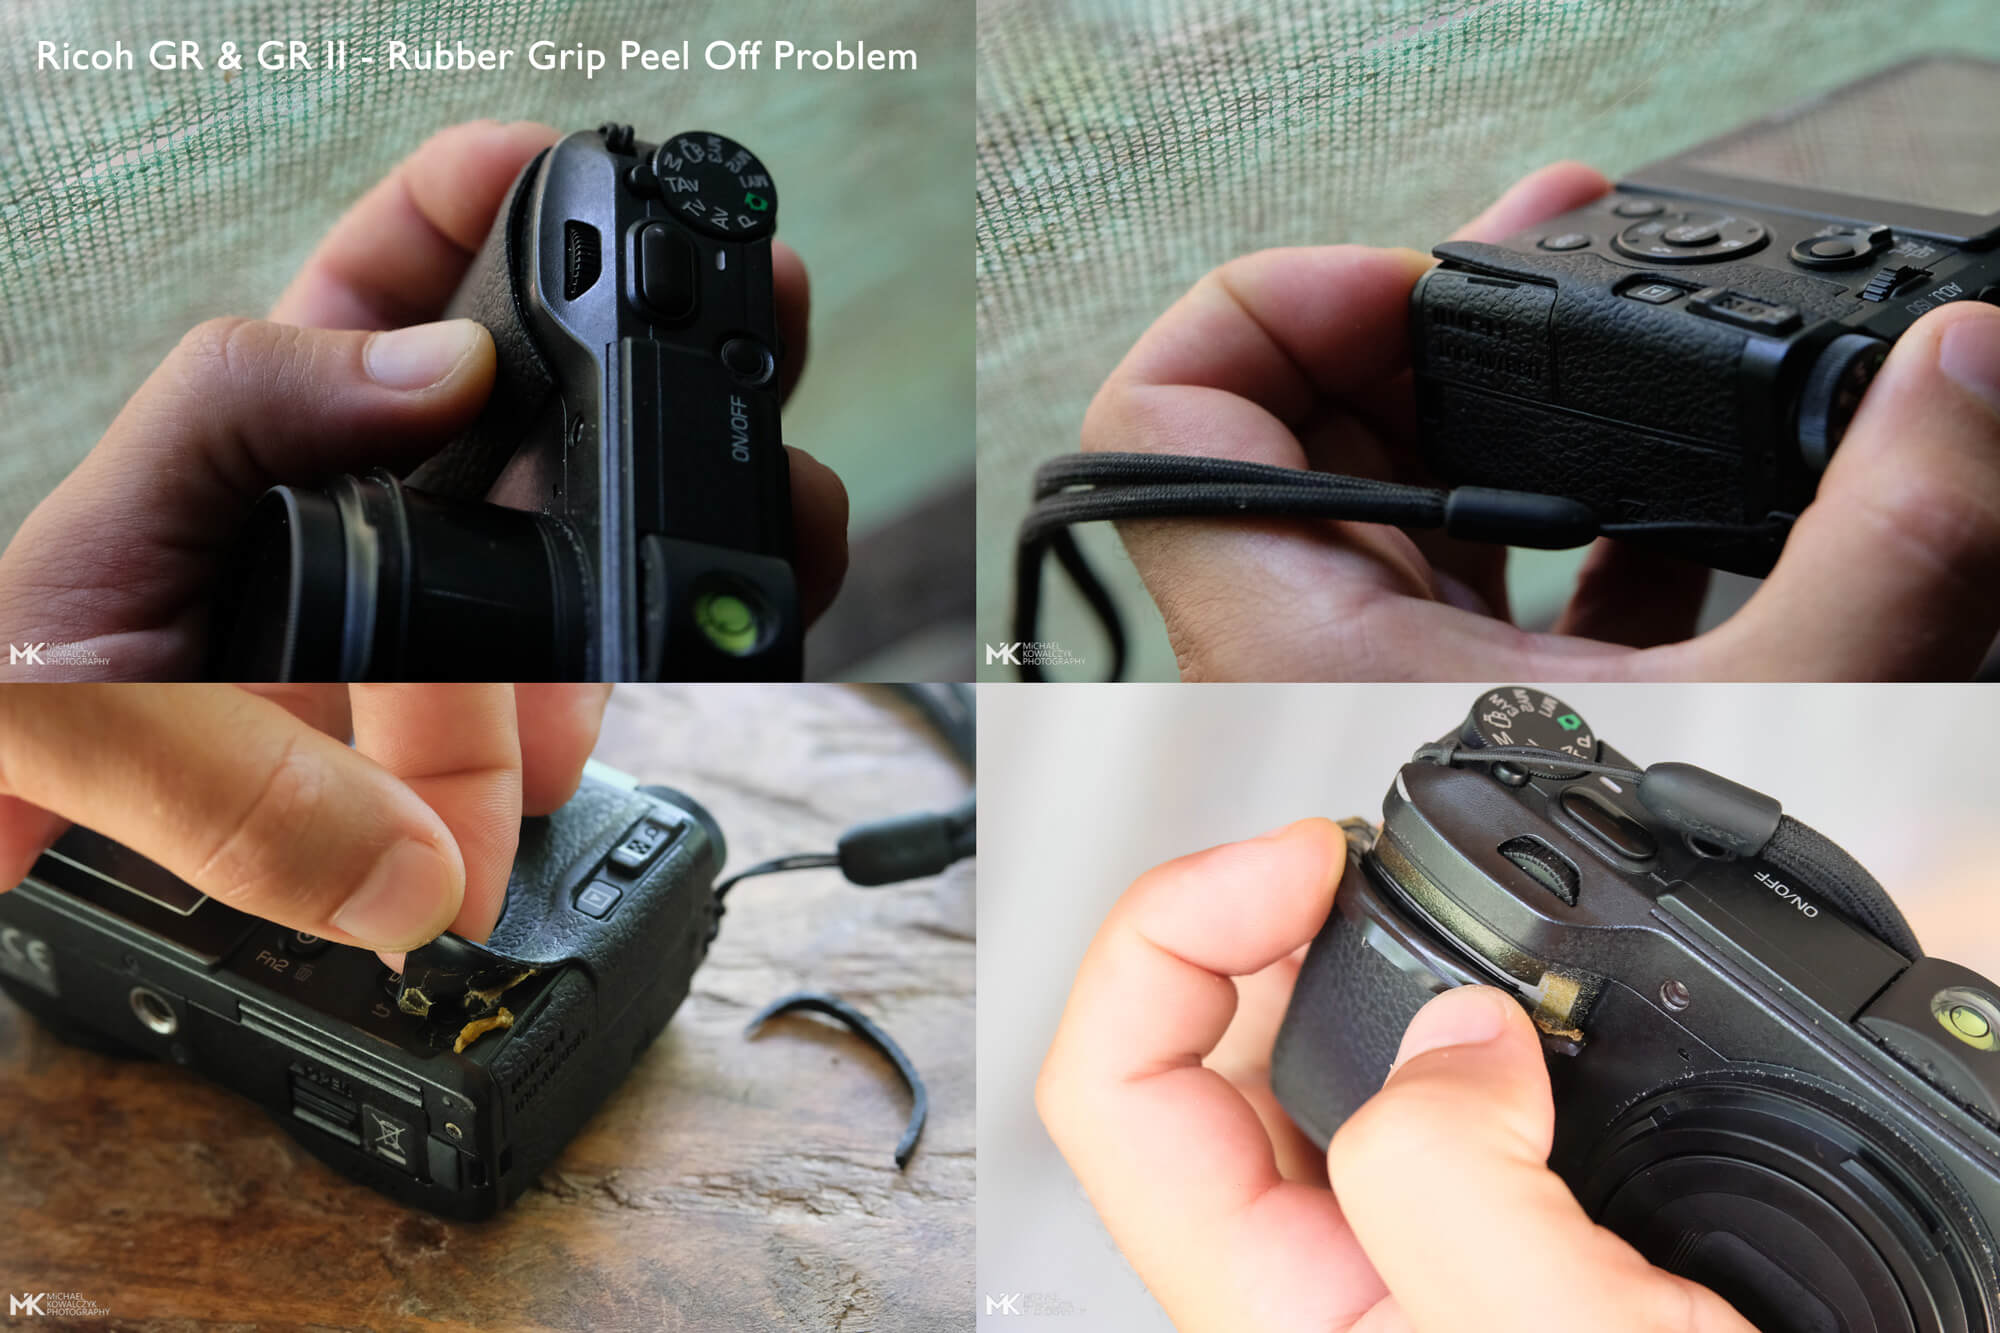 Howto Avoid & Fix Common Ricoh GR Problems - Street Photo Tip